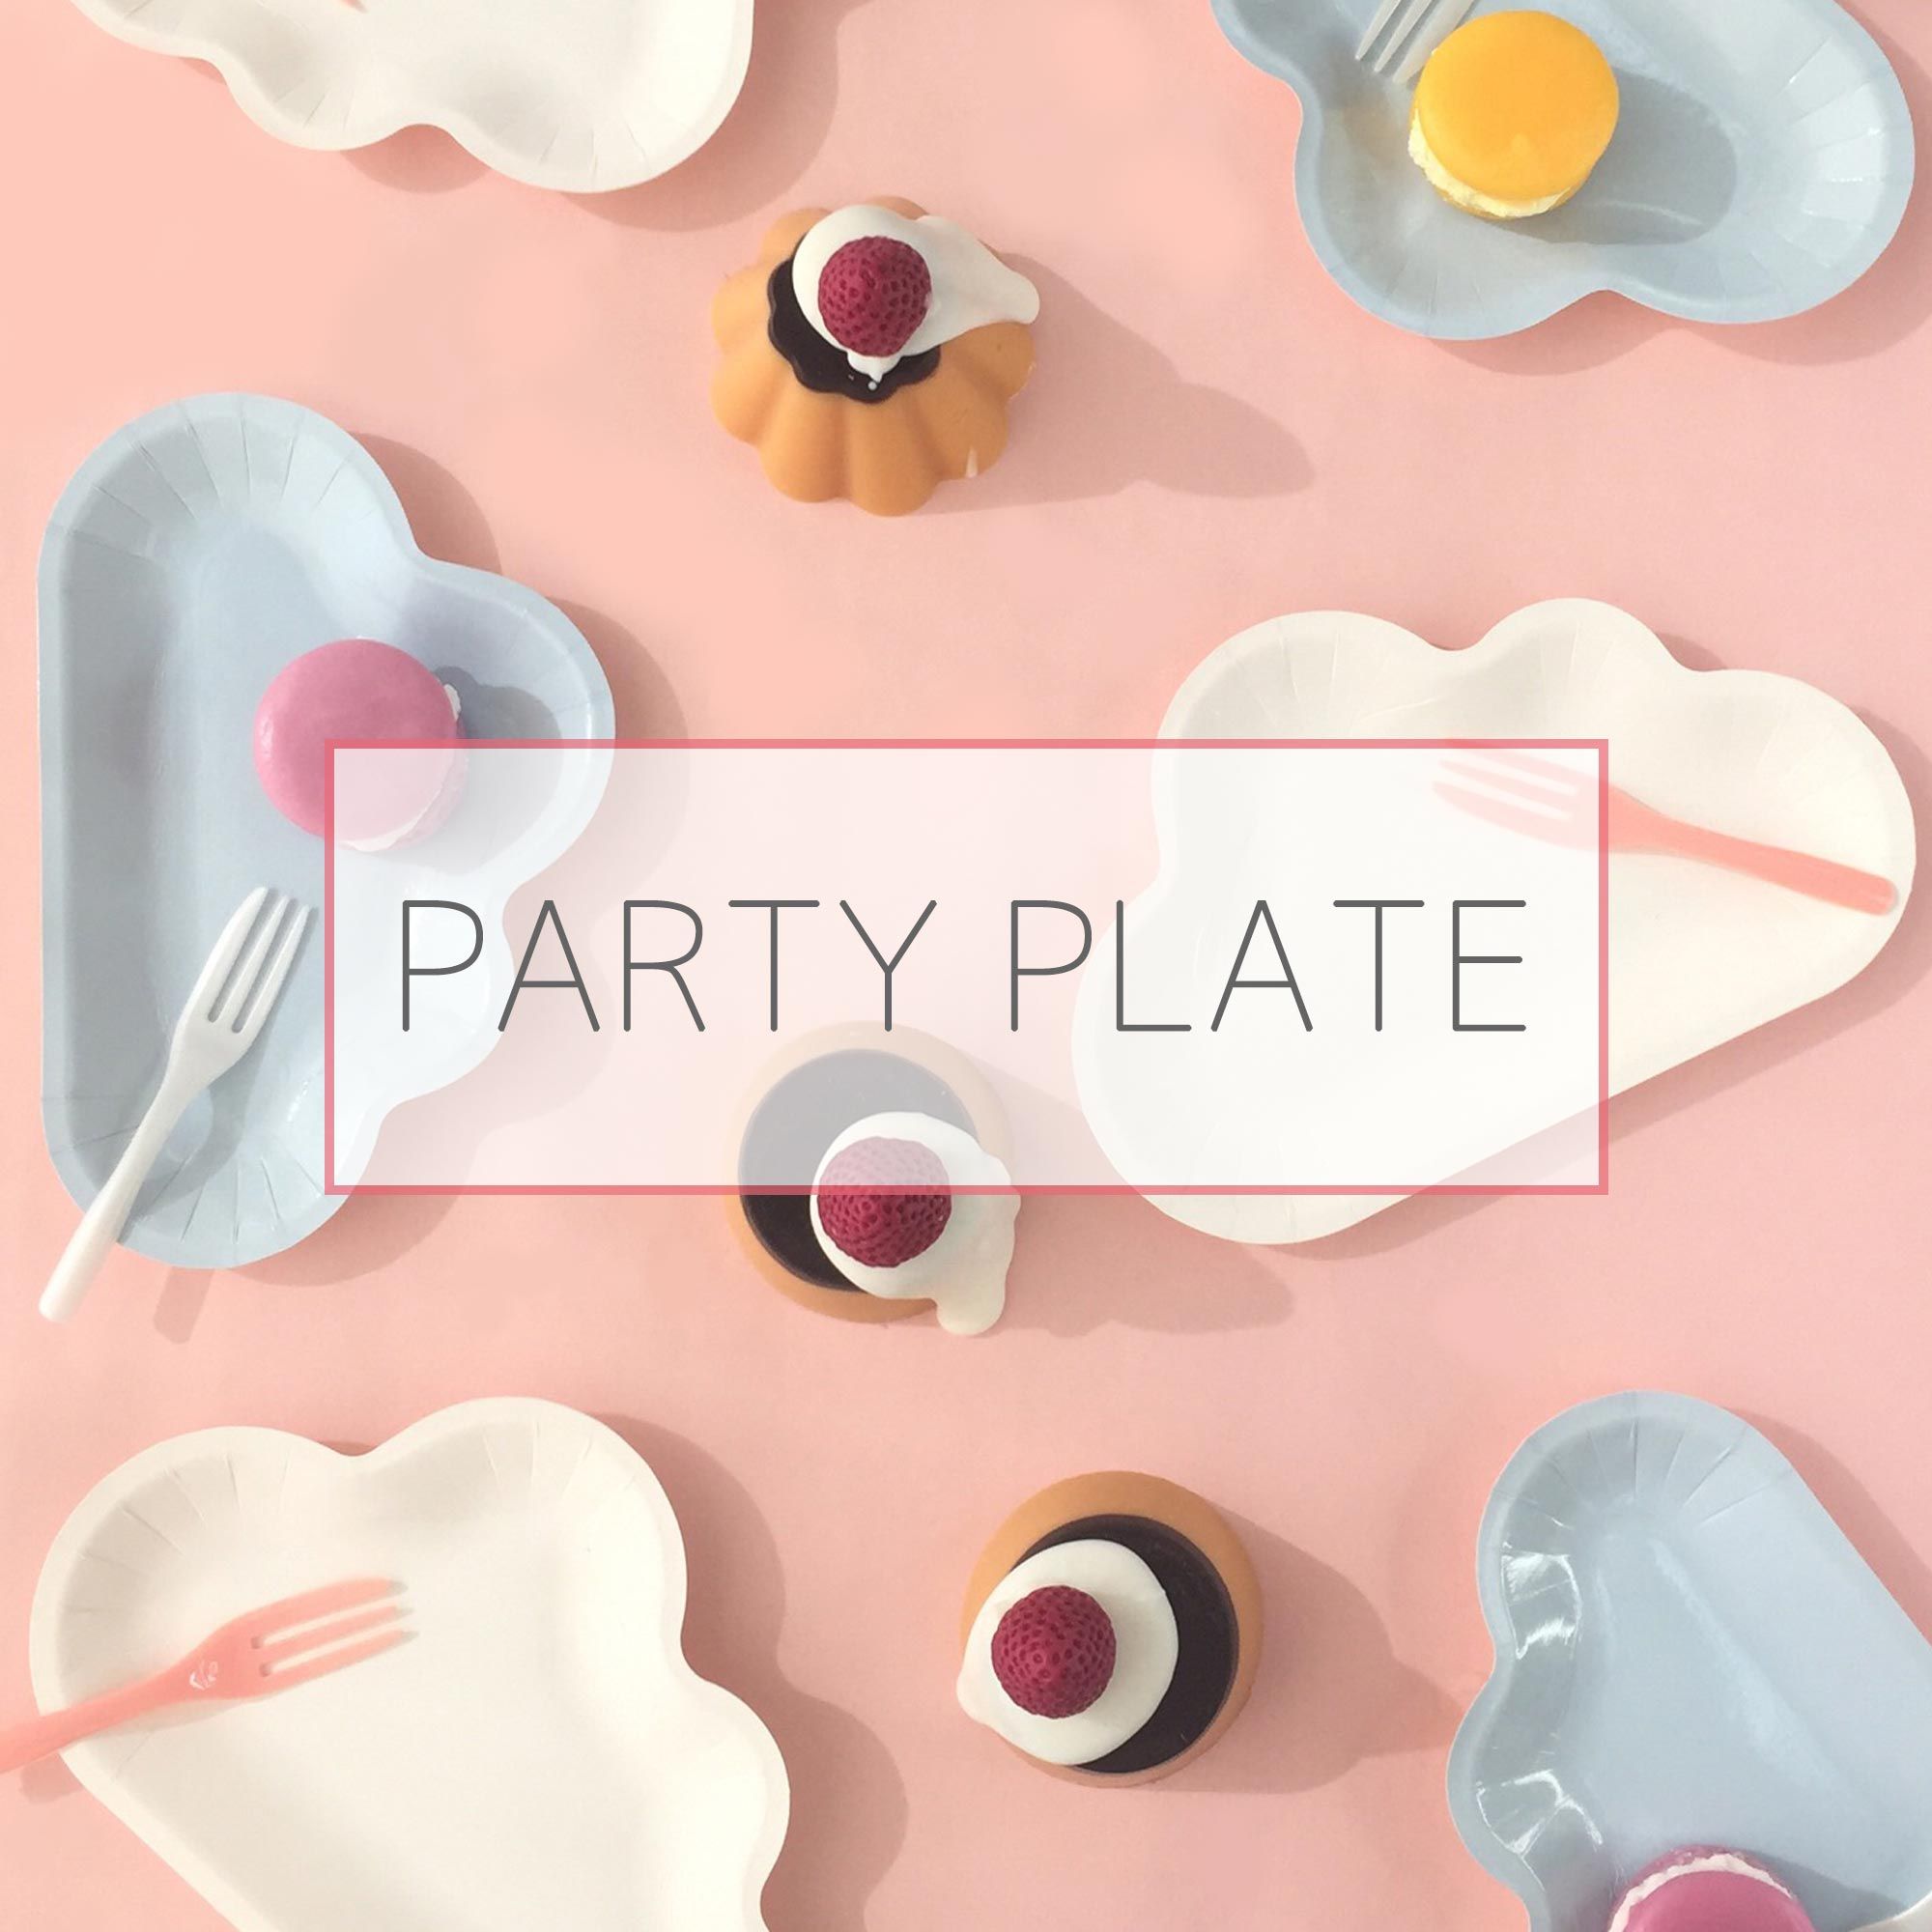 Cake plate set for party